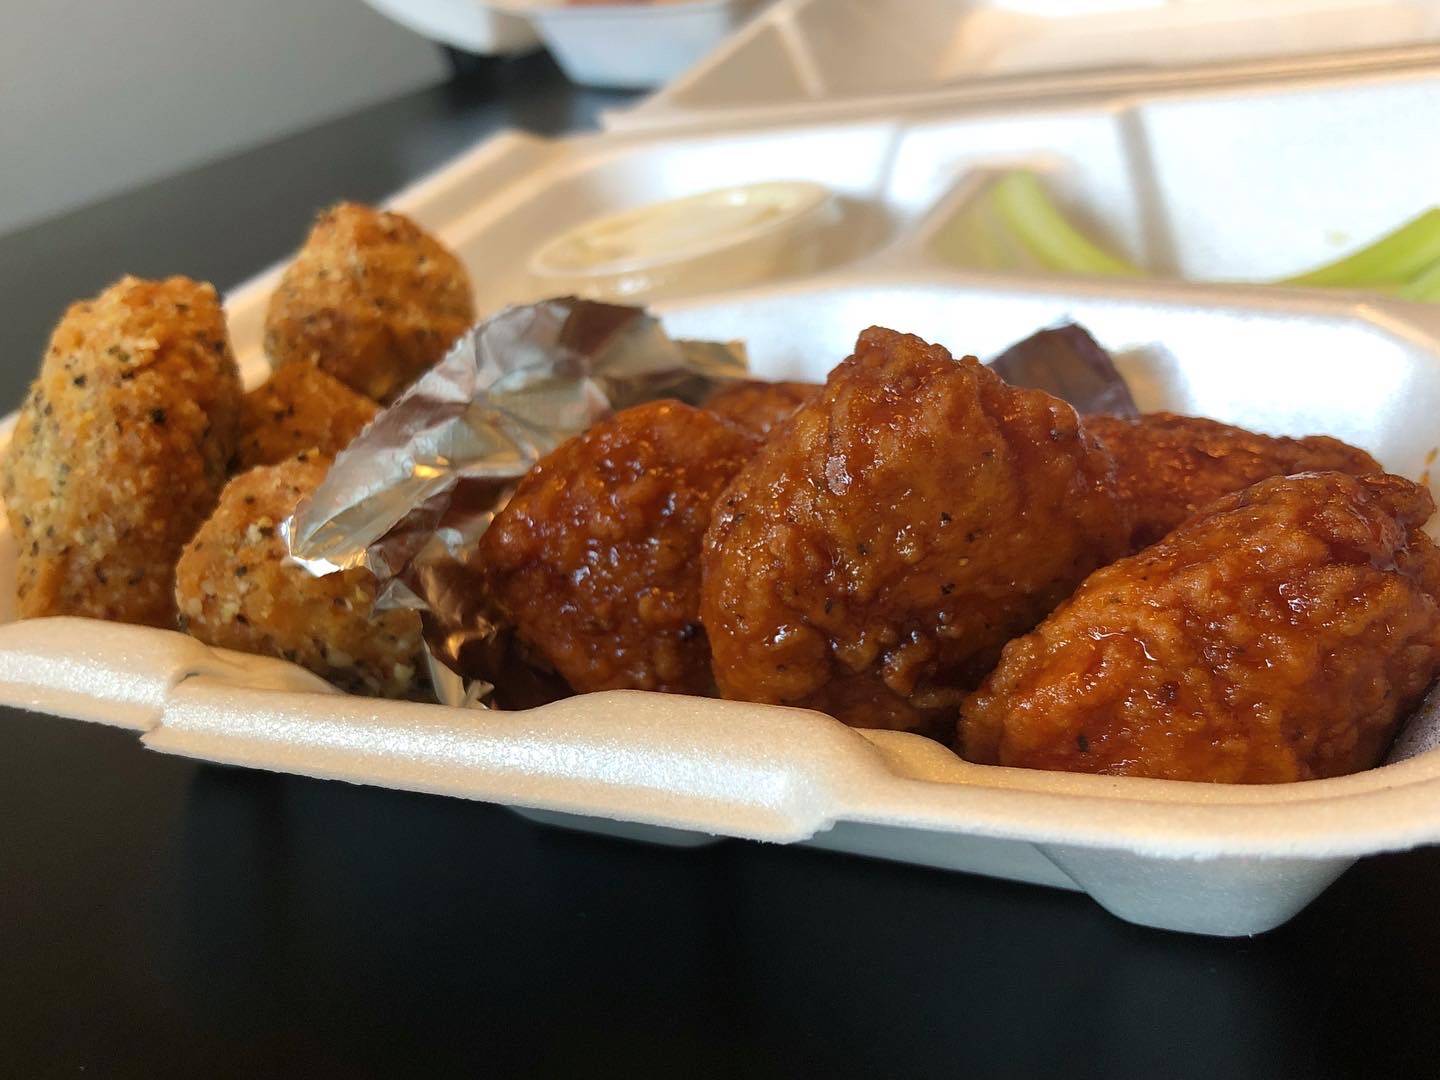 A styrofoam container of boneless wings: one with a dark sauce and one with a dry rub. Photo by Alyssa Buckley.